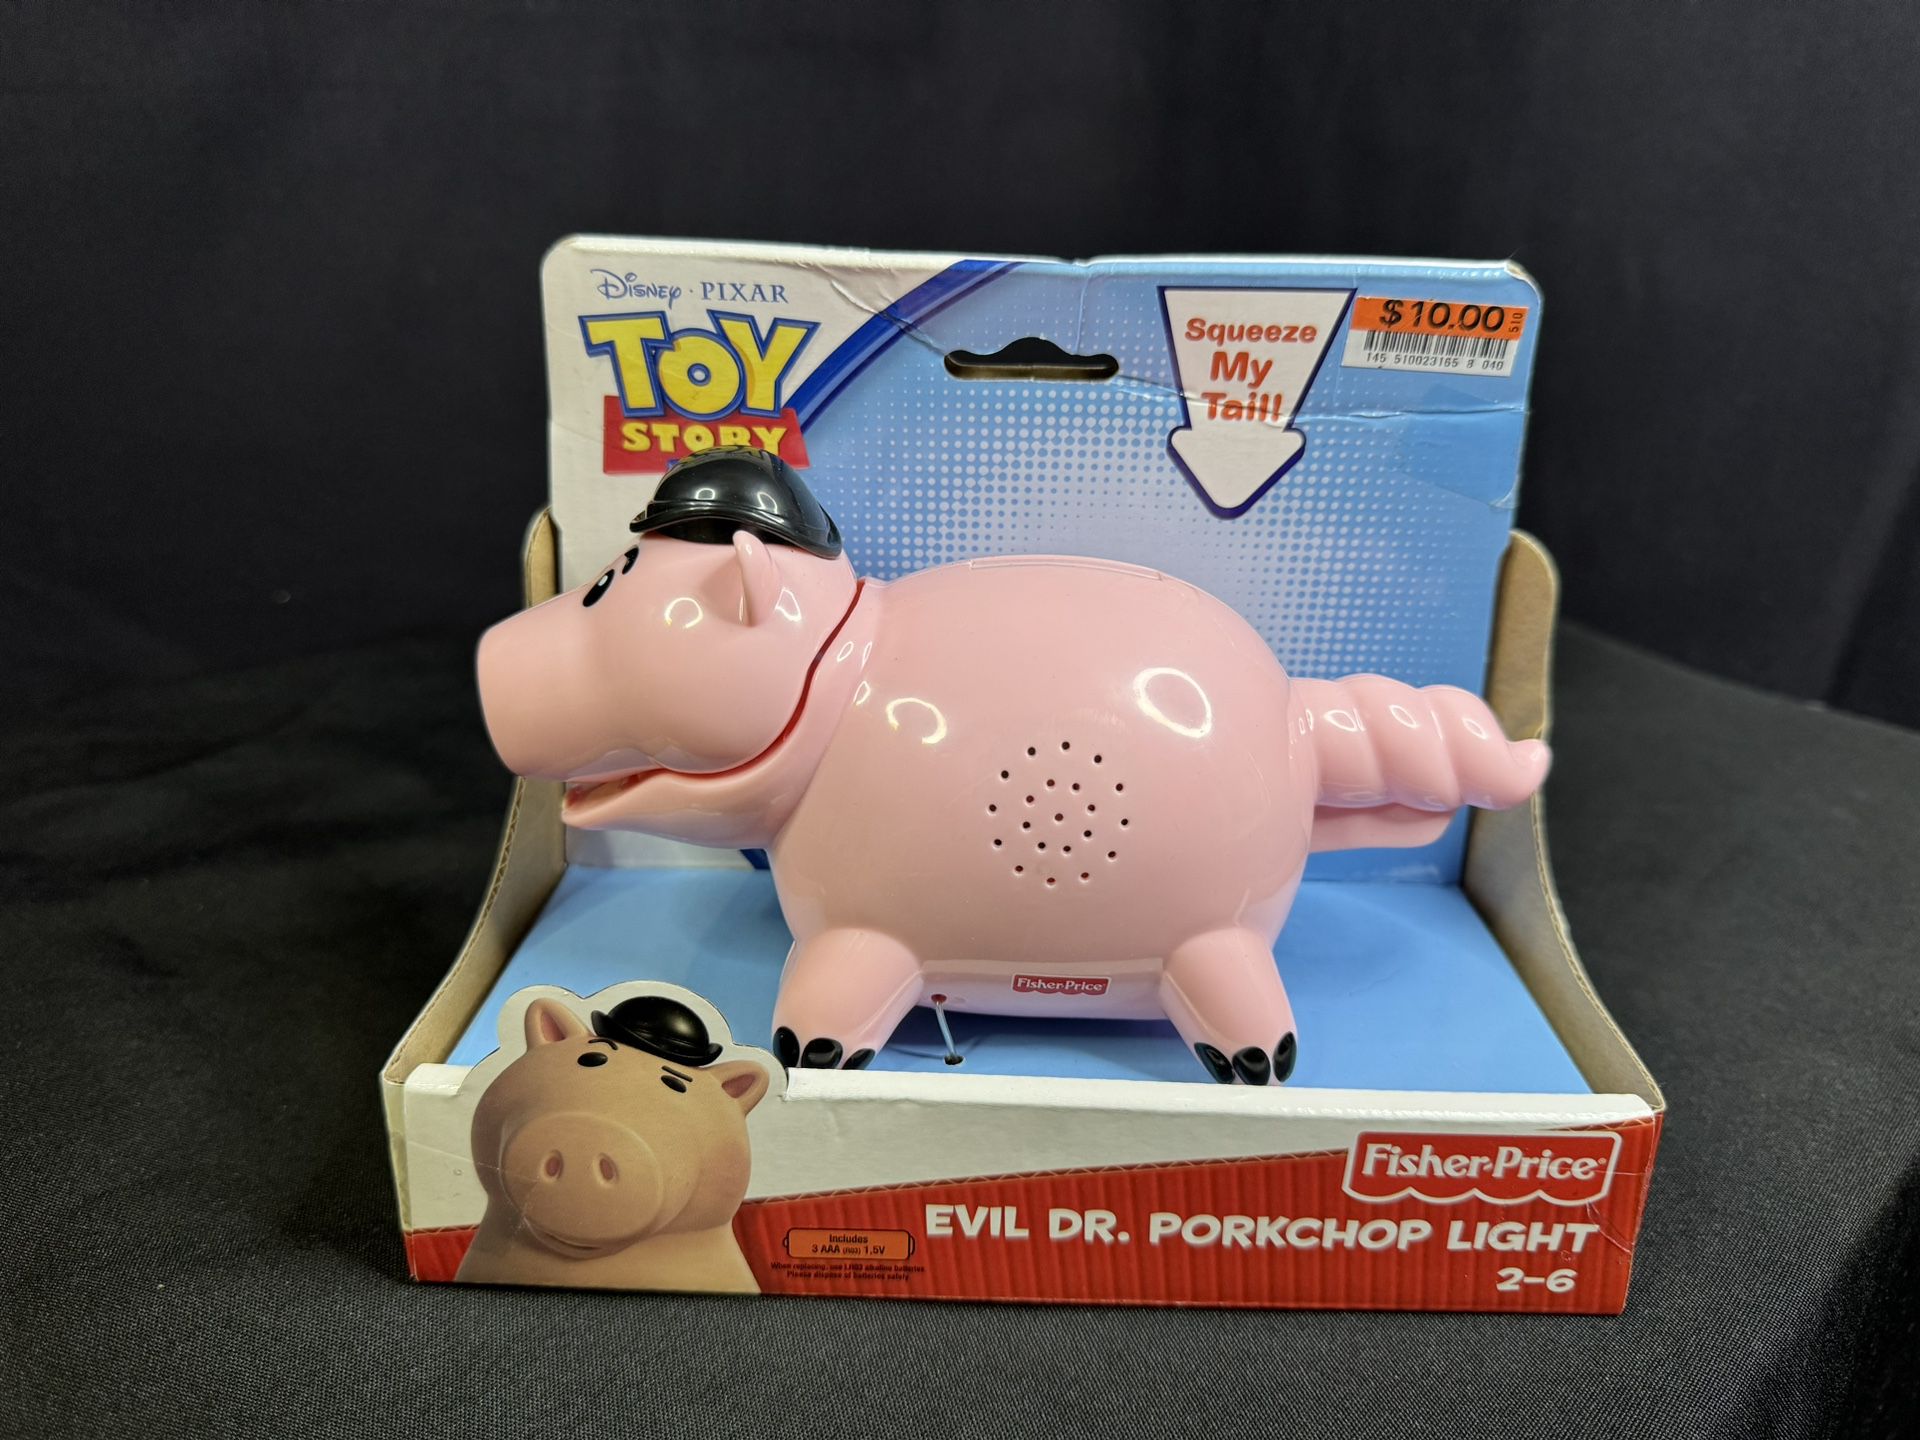 NEW Collectible 2009 Fisher-Price EVIL DR PORKCHOP LIGHT Toy Story 3 Flashlight